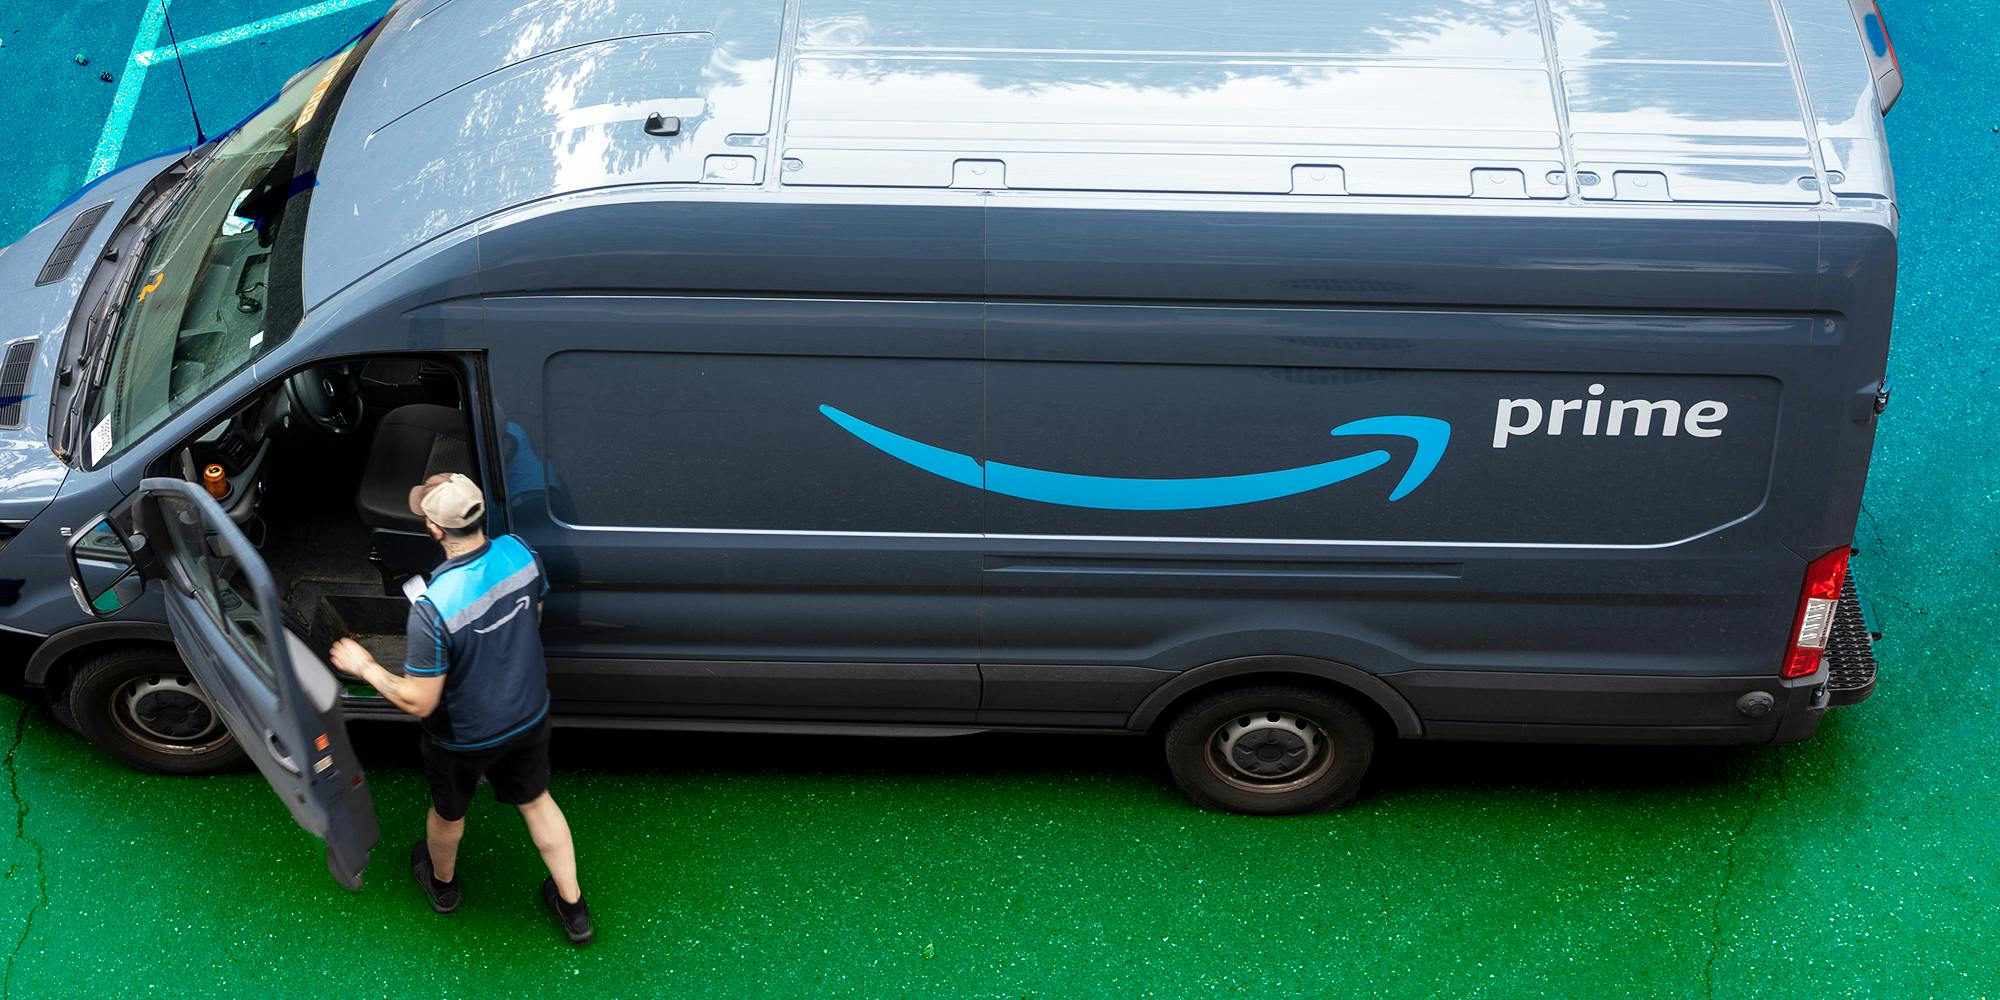 An Amazon delivery driver and his van are seen in a neighborhood parking lot in Lake Oswego, Oregon.